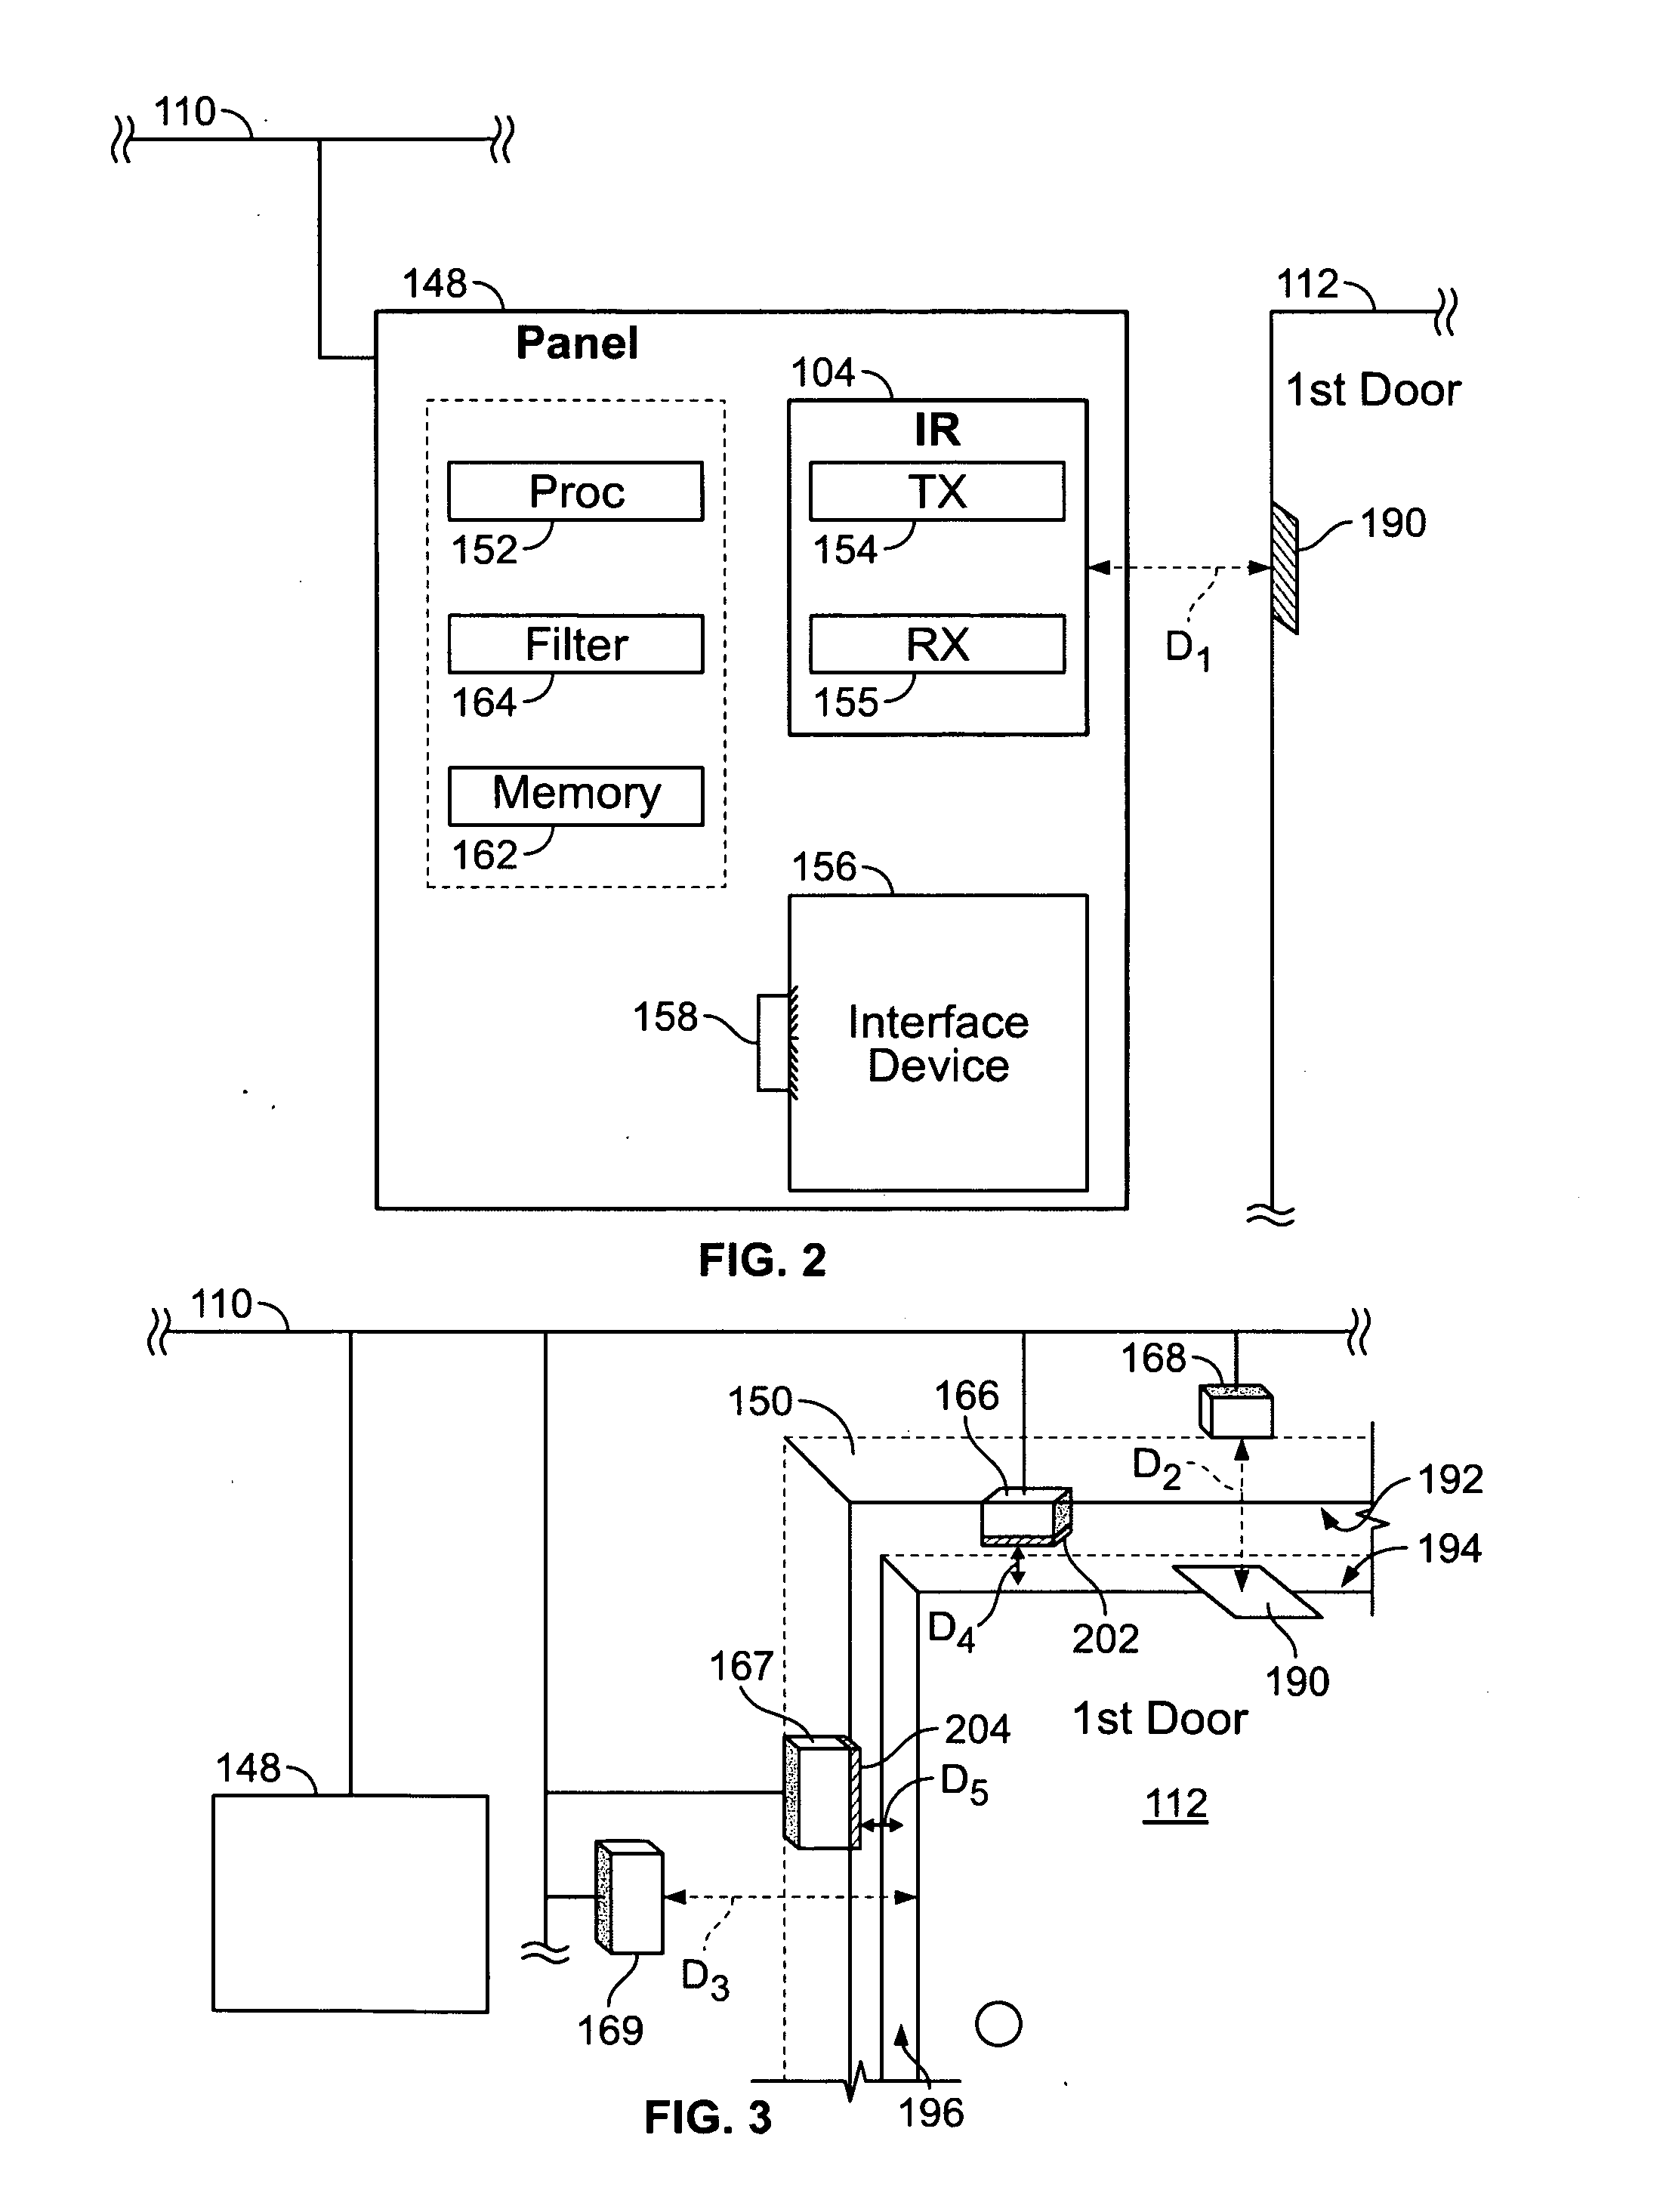 Method and apparatus for using an infrared reflectivity sensor in a security system